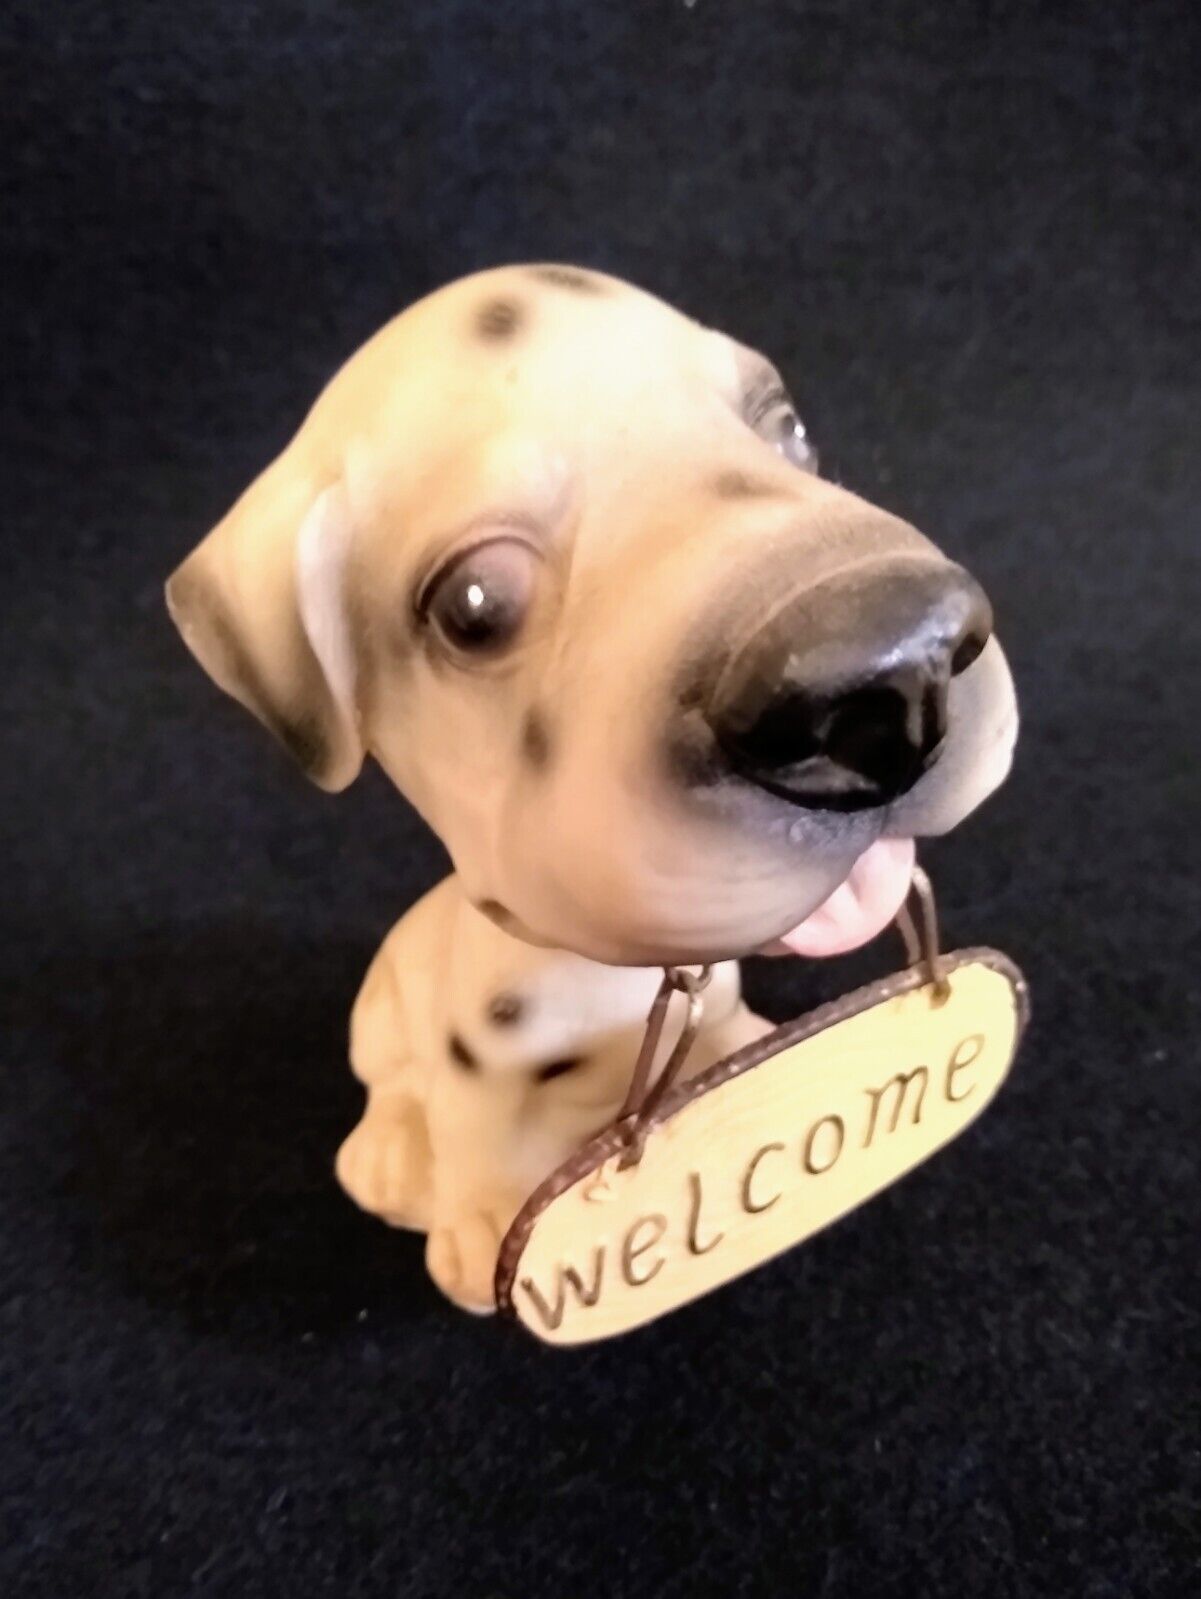 Country Puppy Dog 4.5 in Tall Ceramic Figurine Holding Welcome Sign.